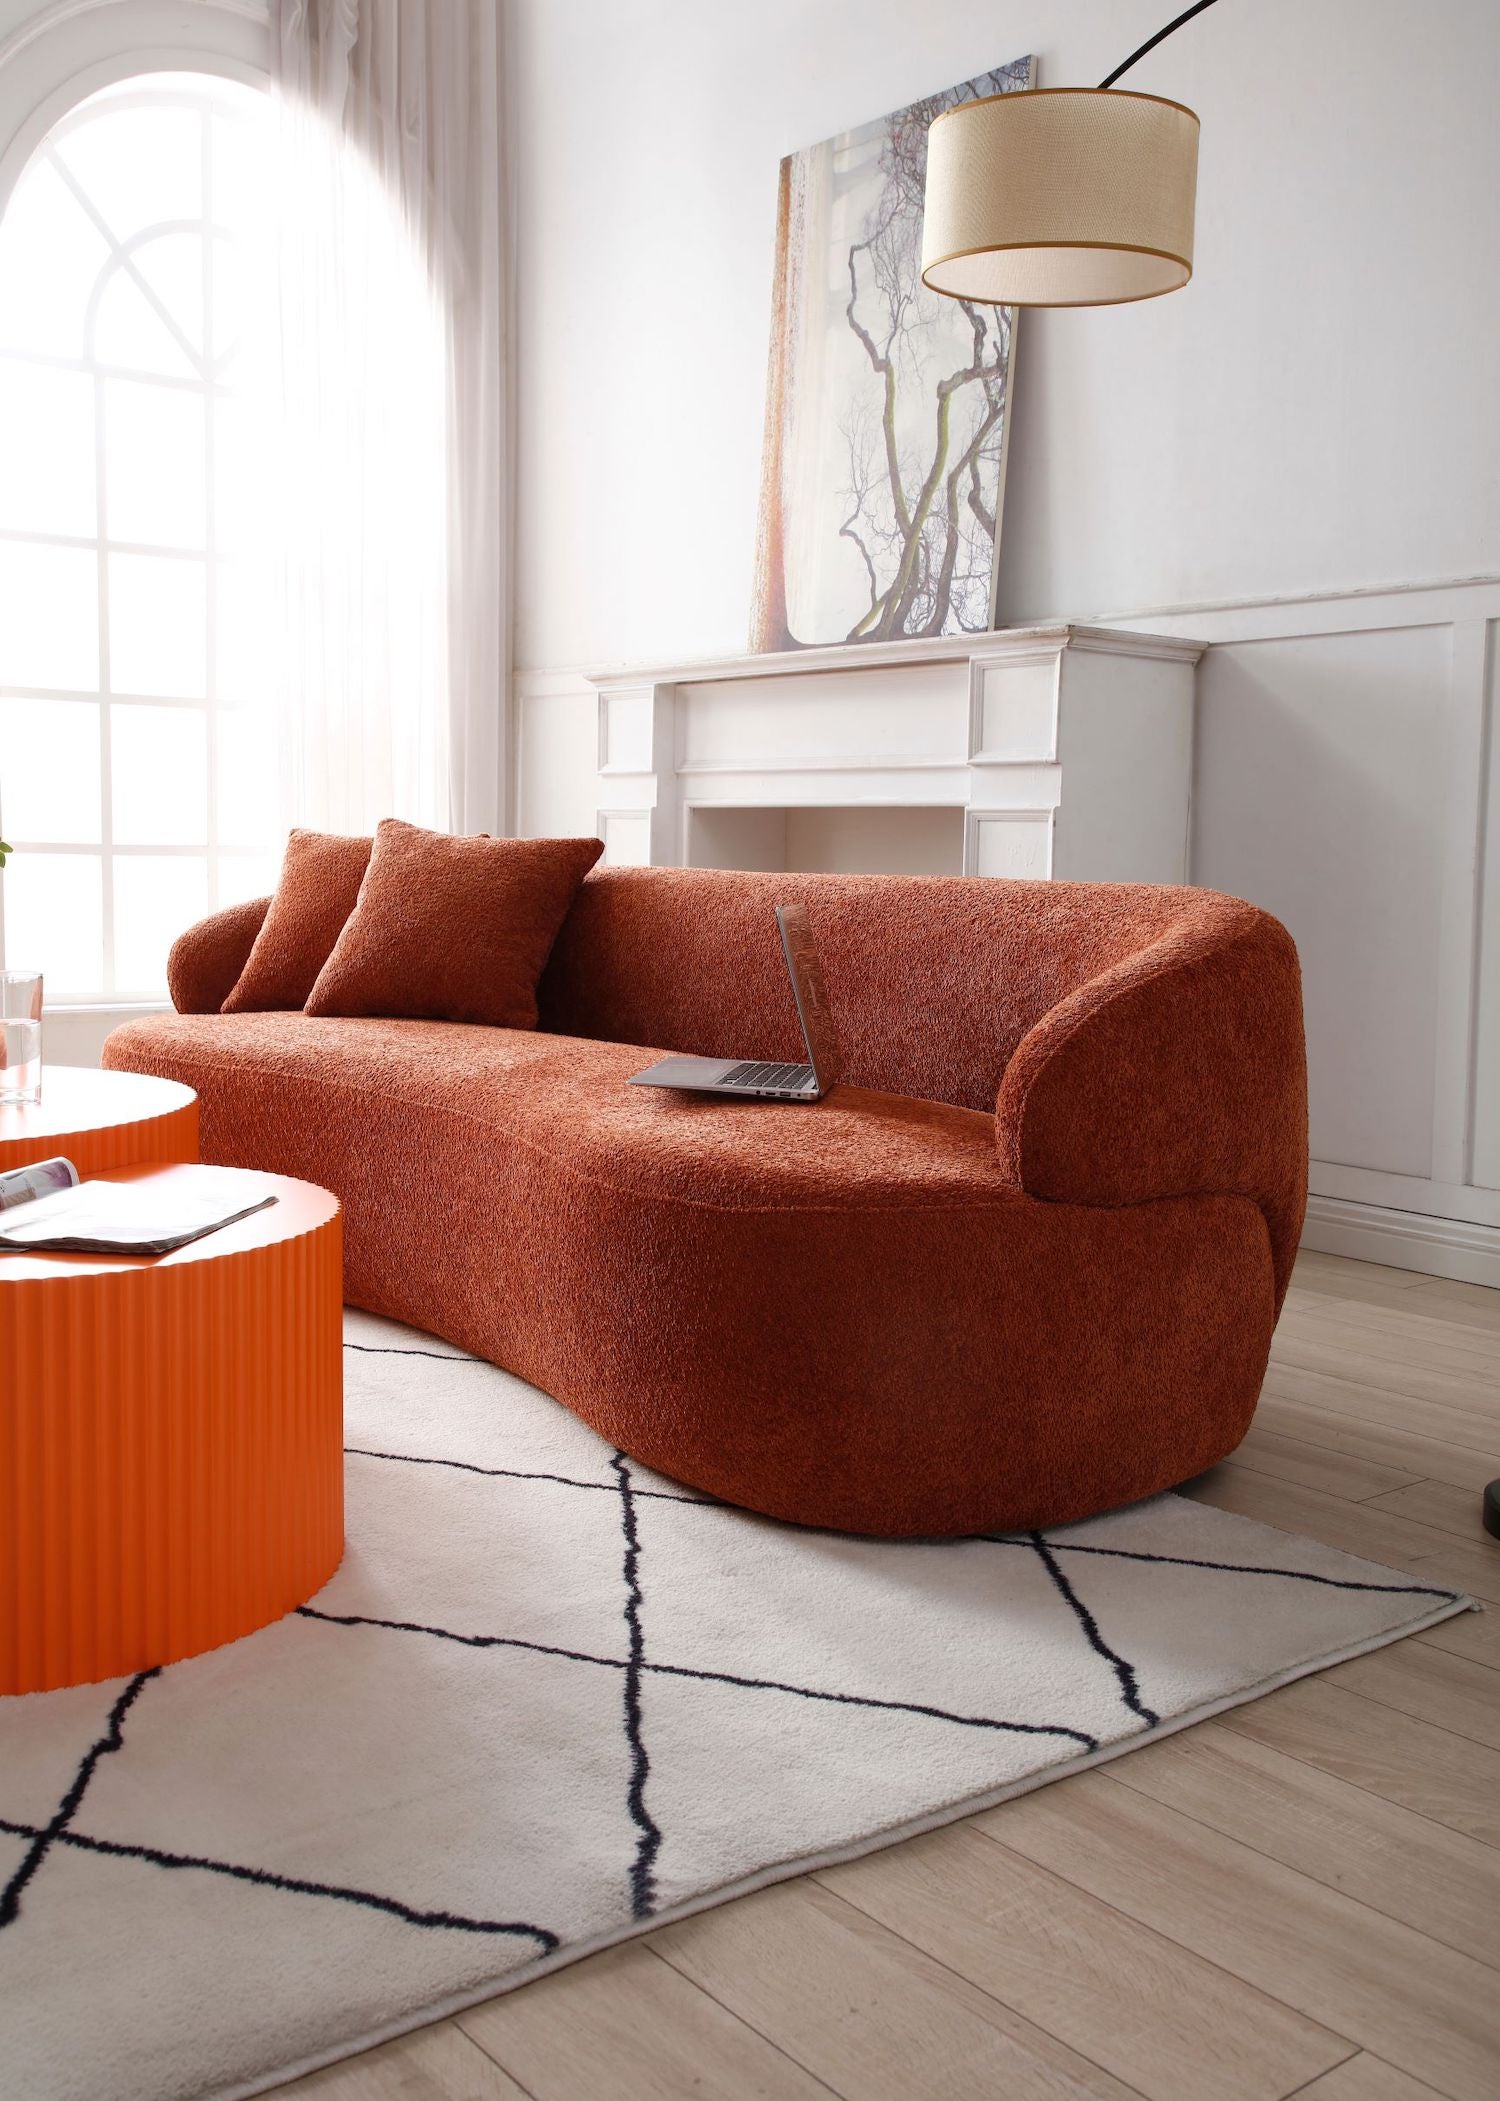 Justone Mid Century Modern Curved Sofa in Orange Boucle Upholstery